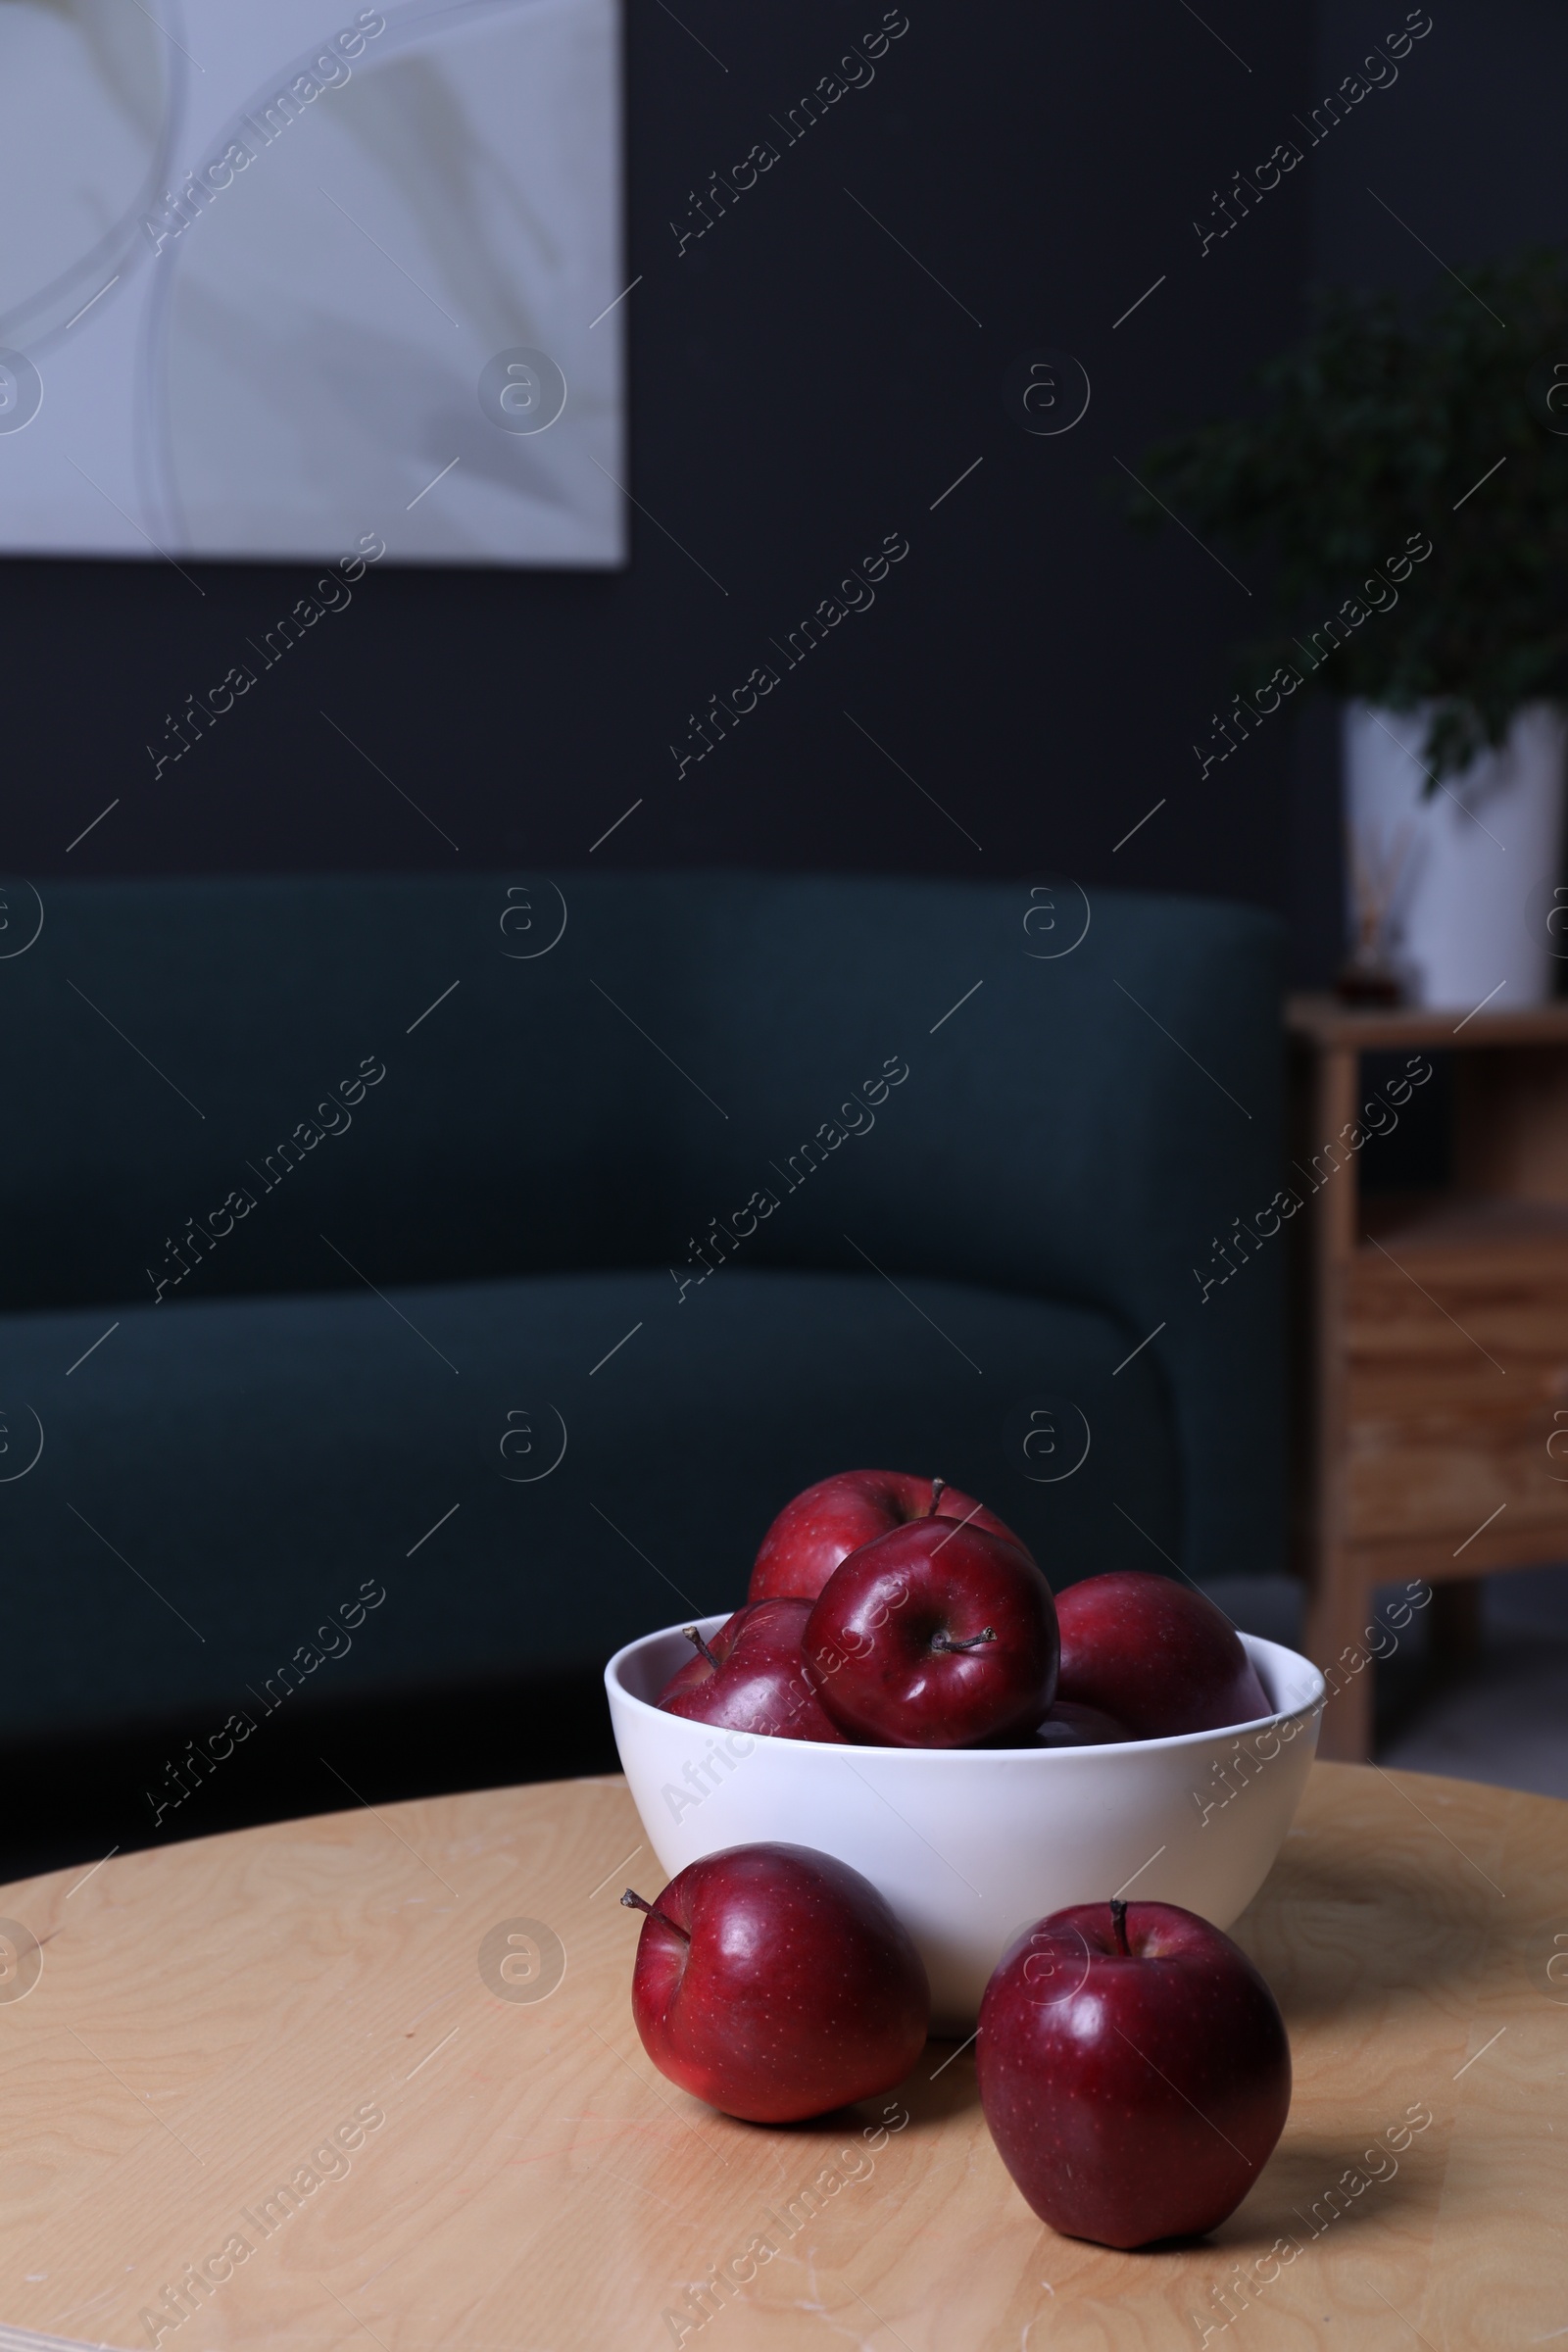 Photo of Red apples on wooden coffee table in room